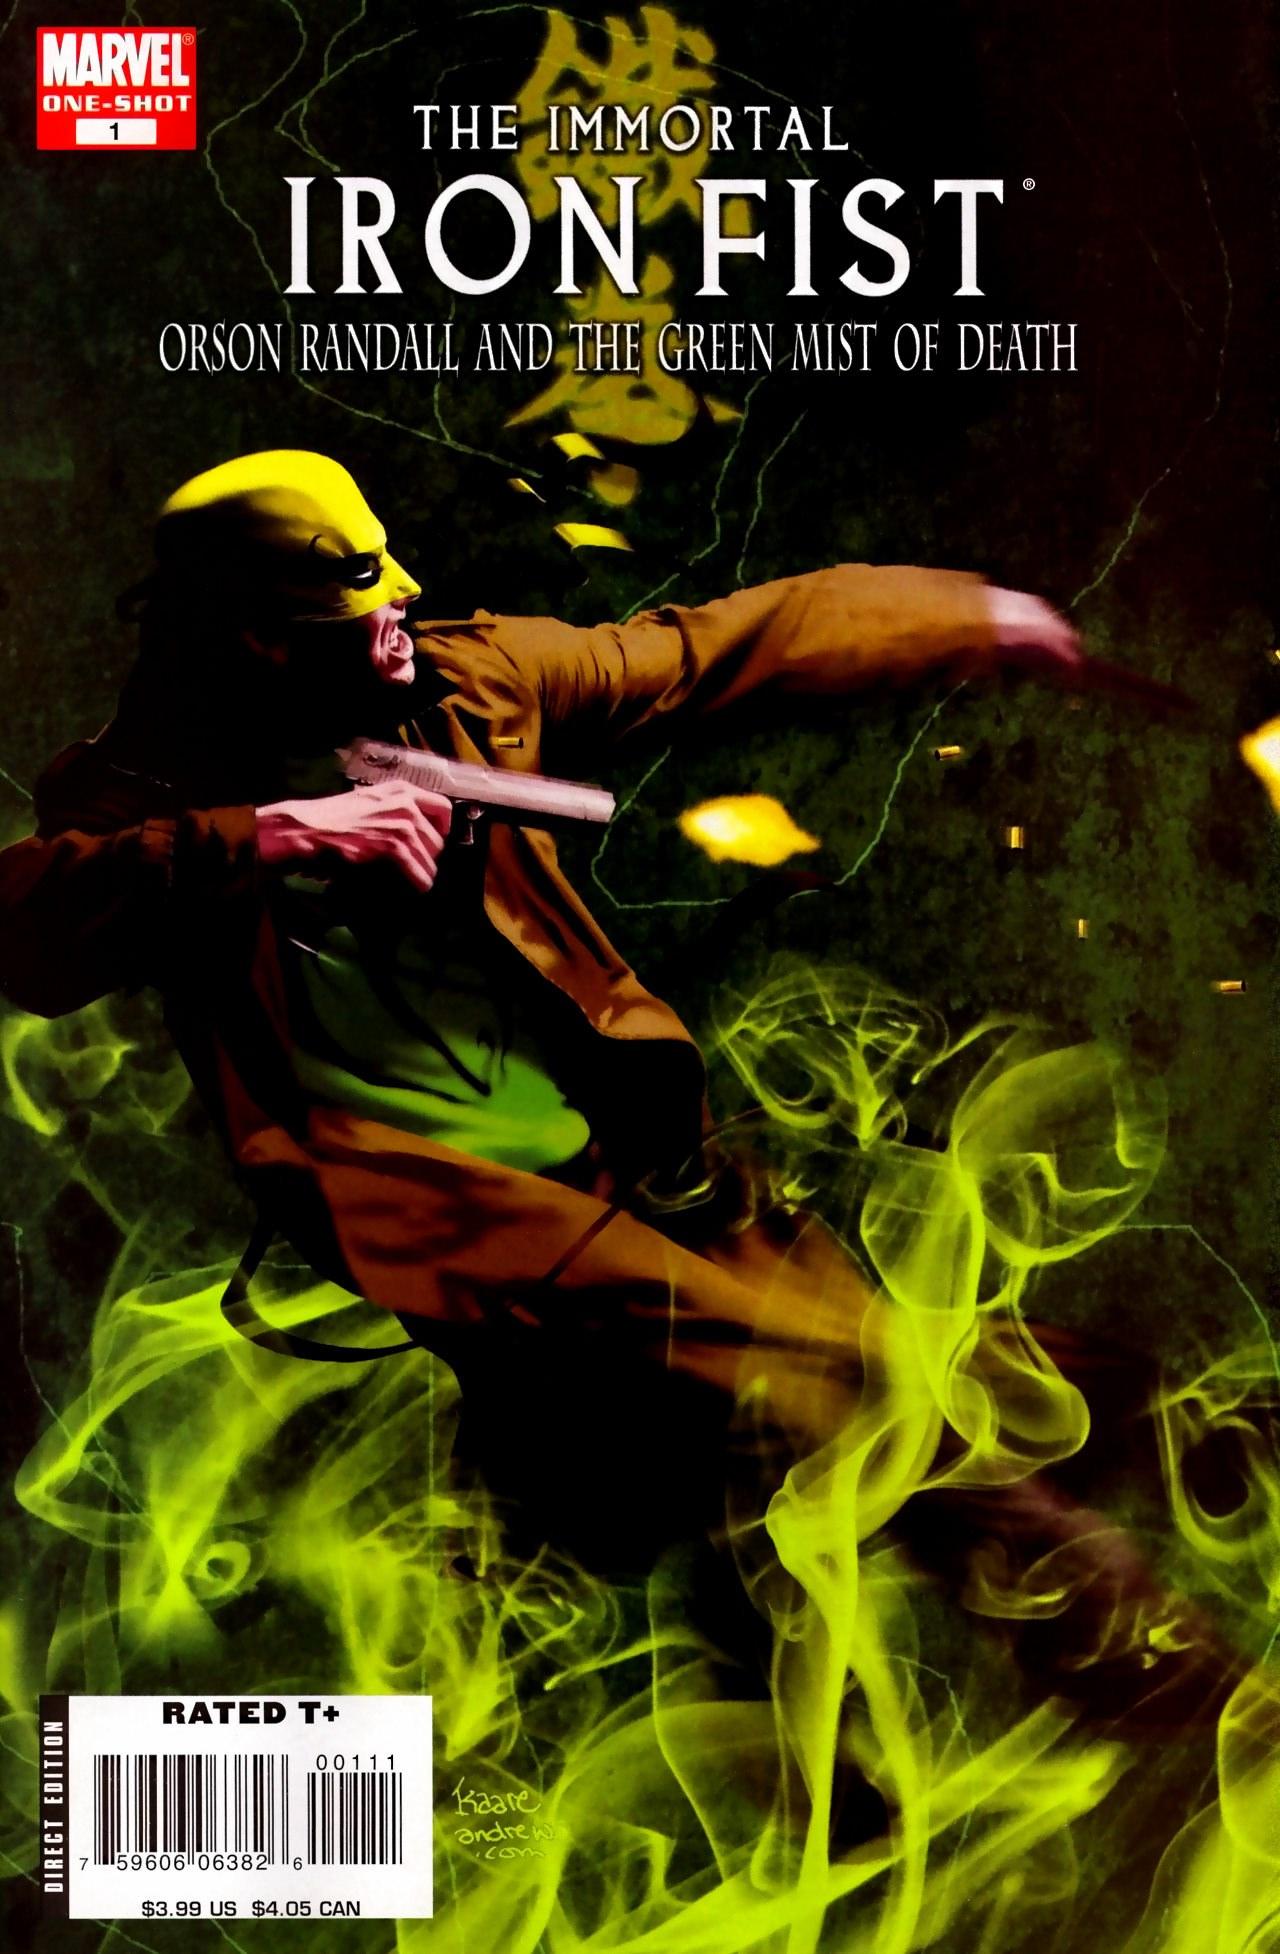 Immortal Iron Fist: Orson Randall and the Green Mist of Death Vol. 1 #1